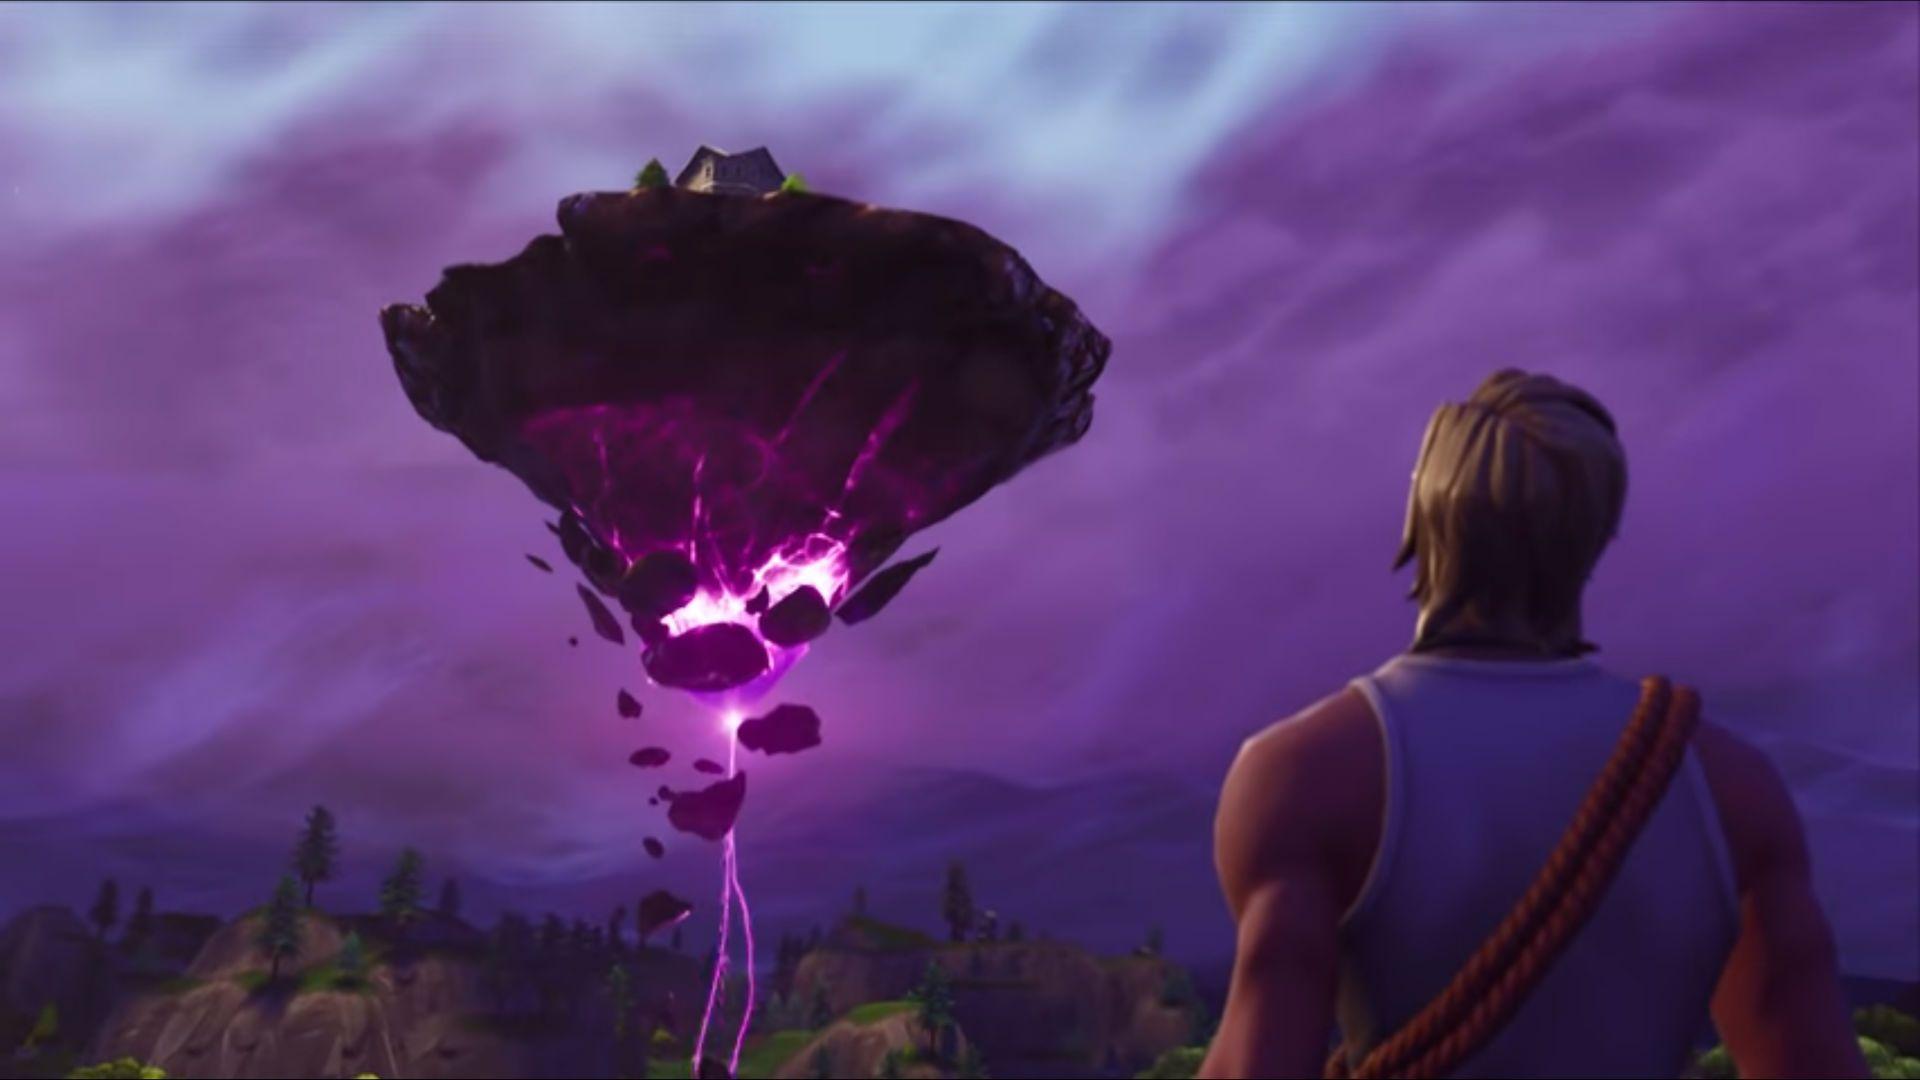 Fortnite dataminers have discovered Kevin the Cube's son